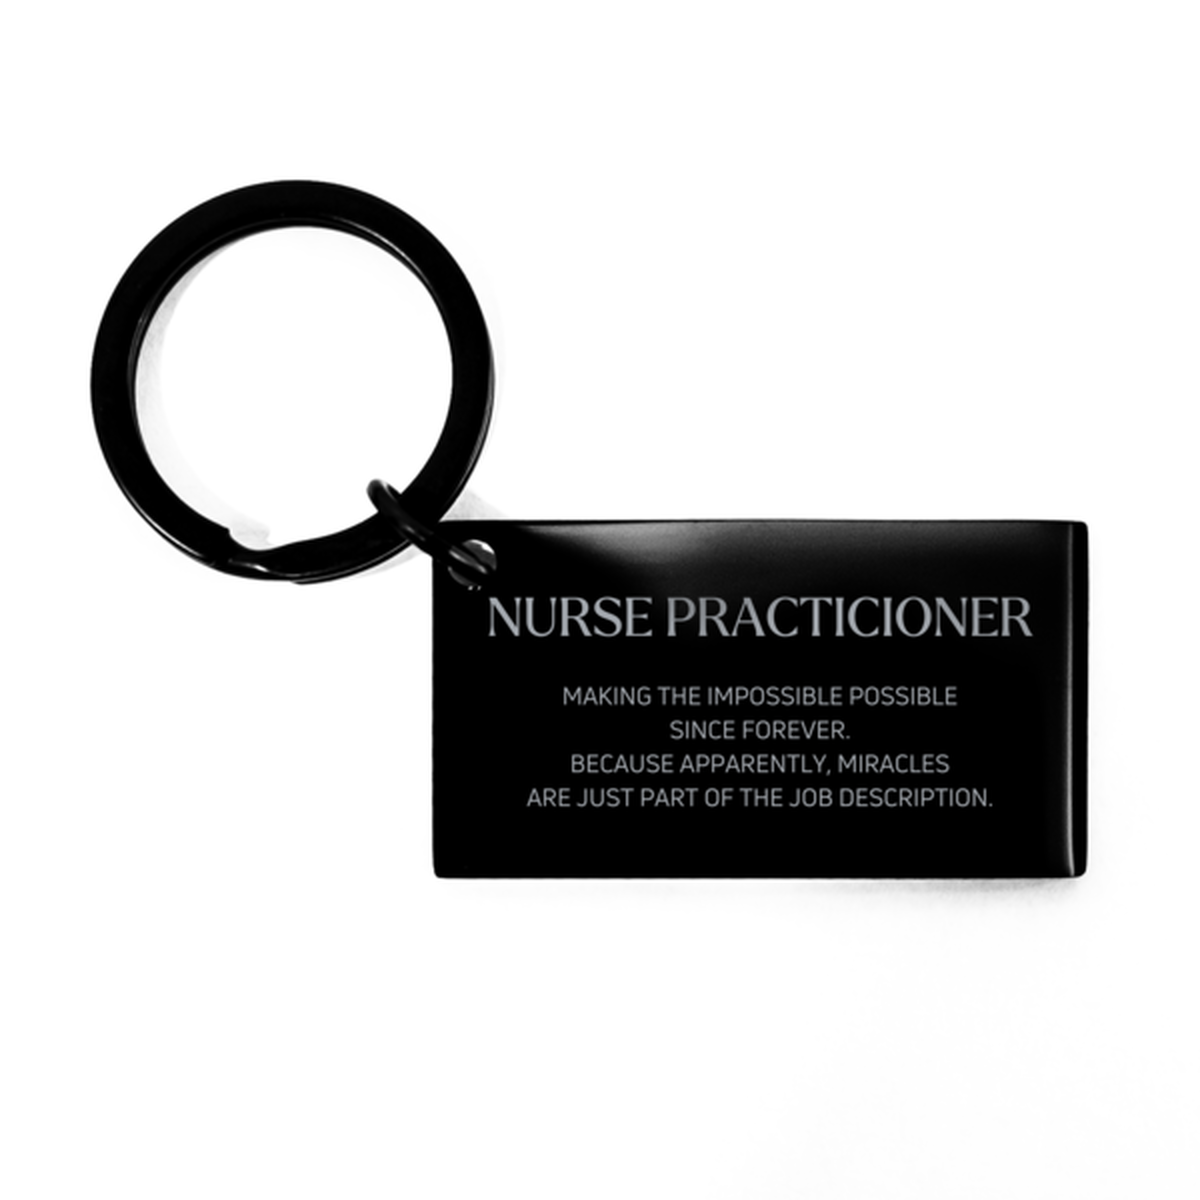 Funny Nurse Practicioner Gifts, Miracles are just part of the job description, Inspirational Birthday Keychain For Nurse Practicioner, Men, Women, Coworkers, Friends, Boss